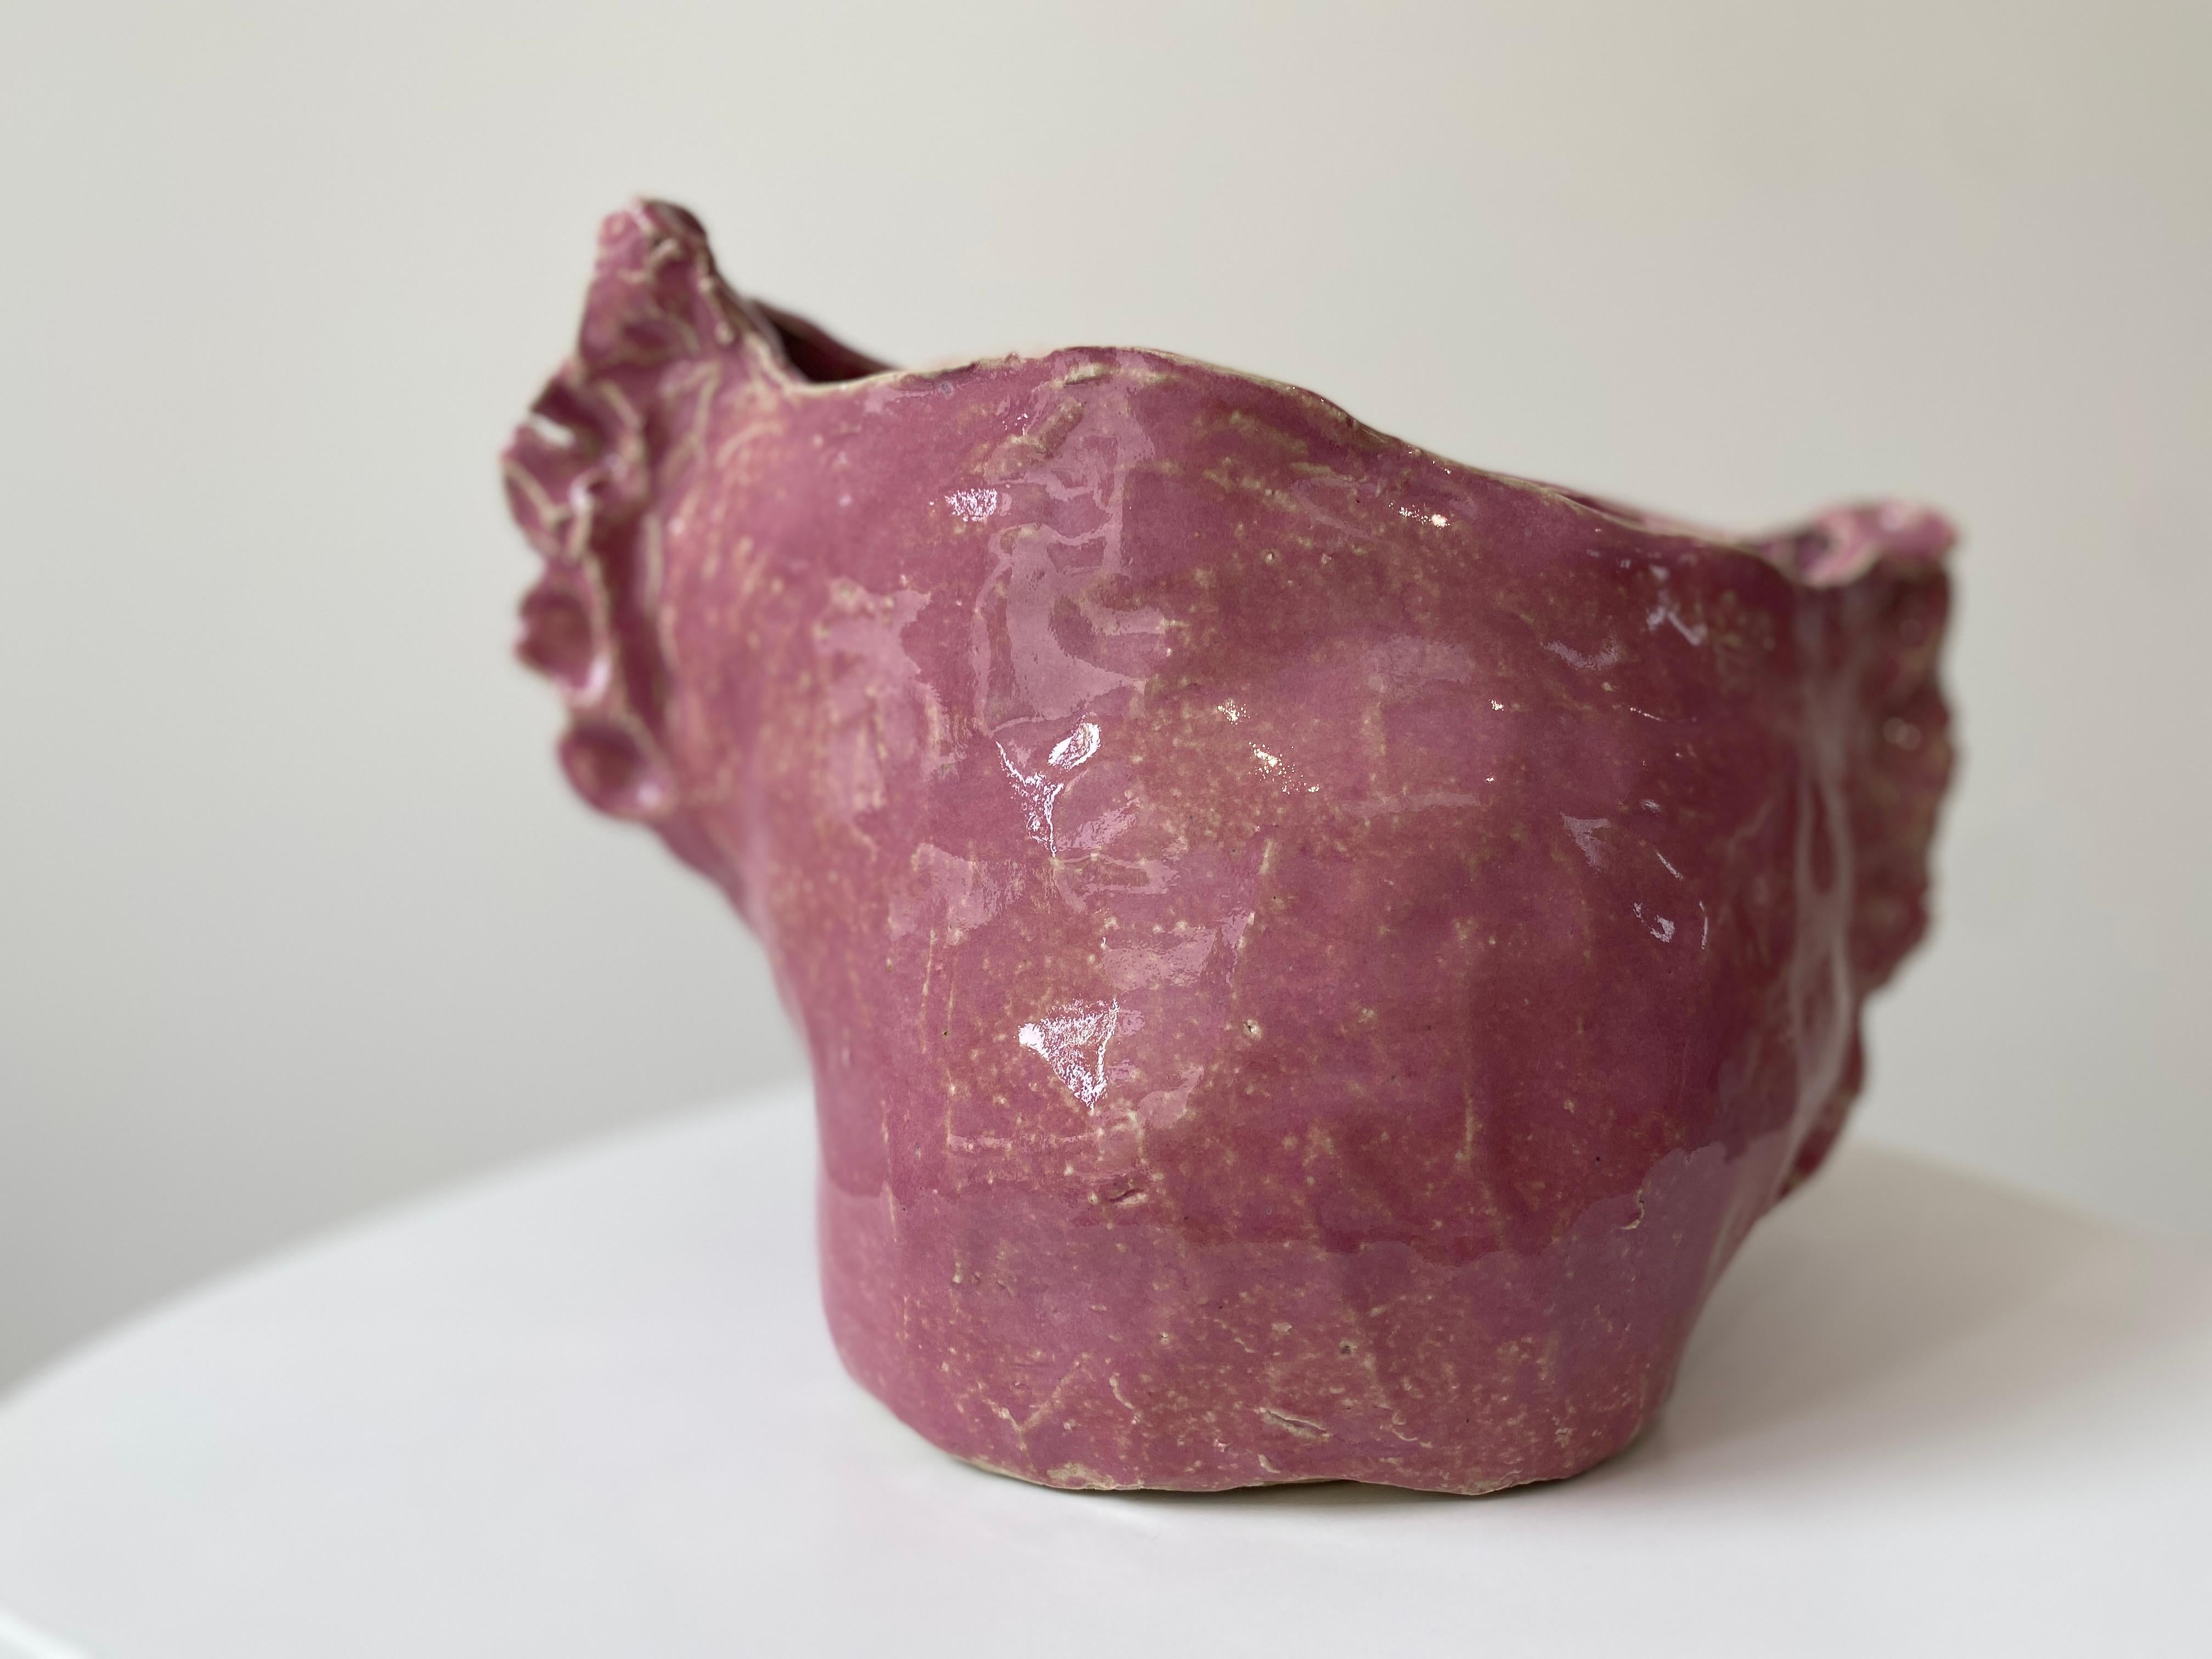 Pink sweet girl rustic wabi sabi hand sculpted glazed clay head face vessel vase For Sale 6